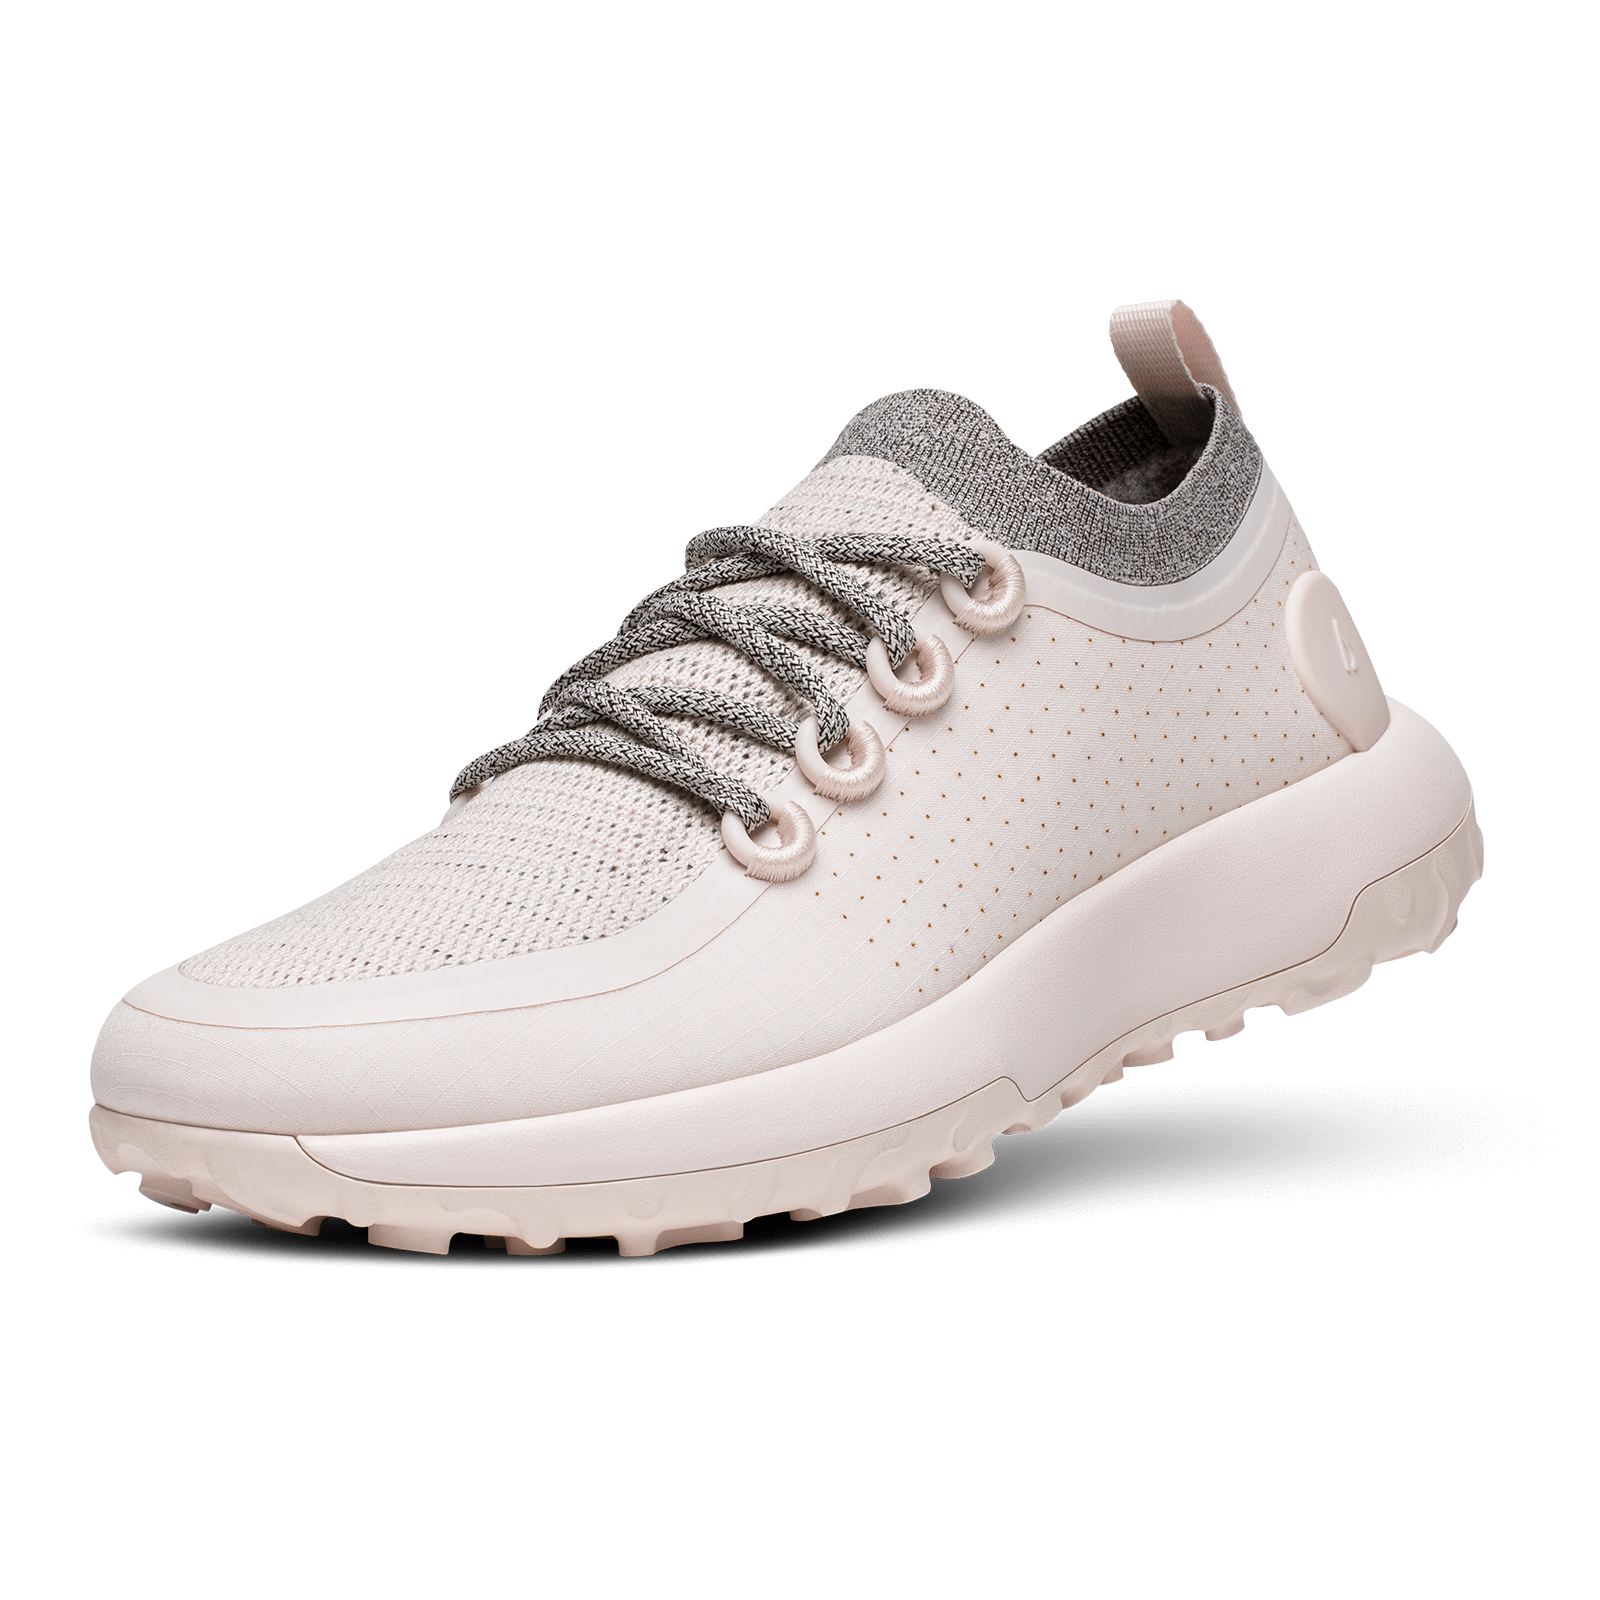 Women's Trail Runners SWT - Calm Taupe (Calm Taupe Sole)